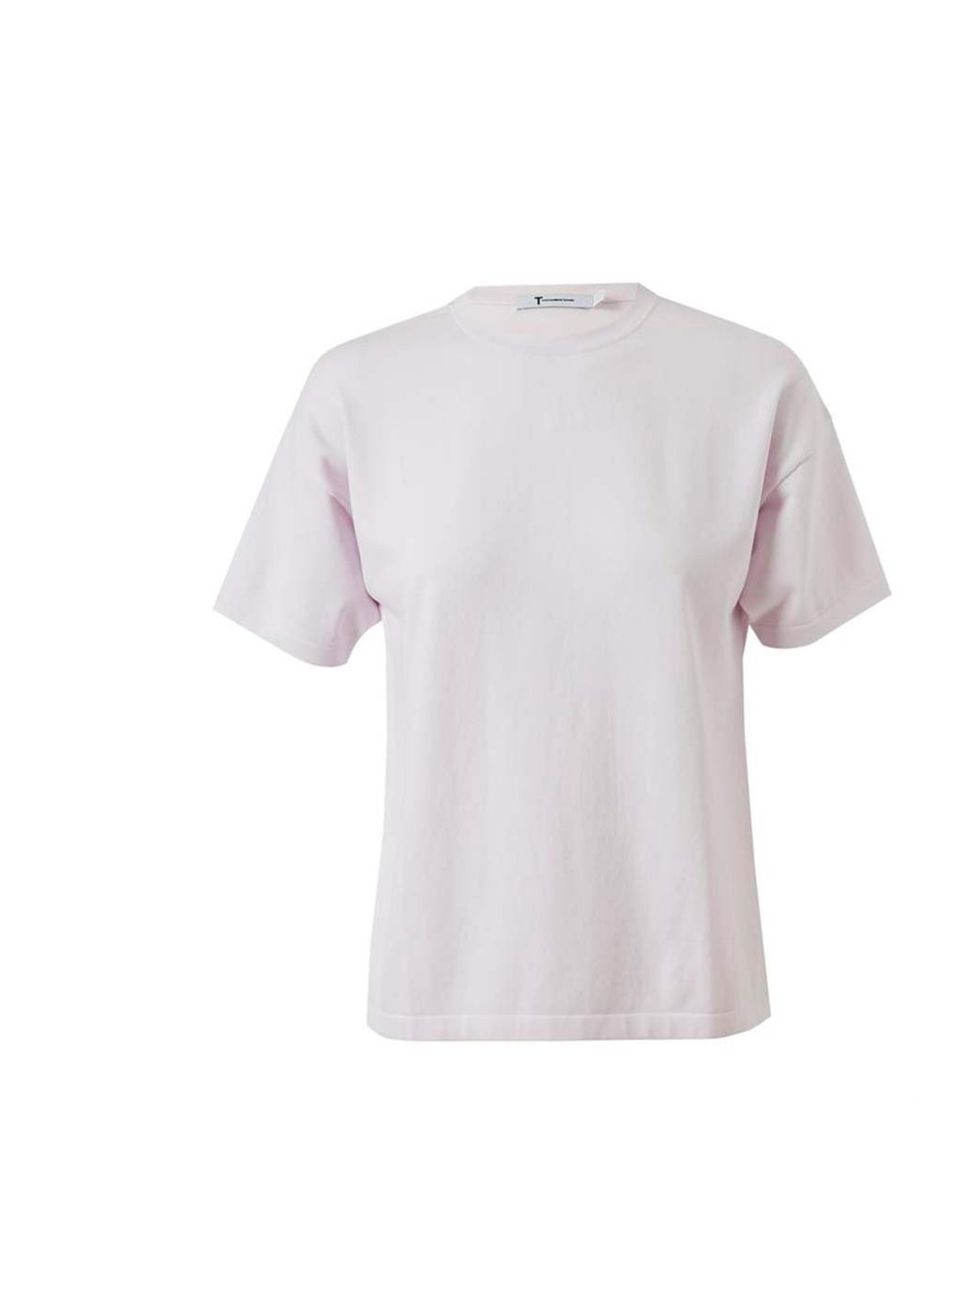 <p>This pale lilac tee is a great alternative to the normal white, and a great starting point for any outfit.</p><p>T by Alexander Wang t-shirt, was £105 now £65 at <a href="http://www.brownsfashion.com/product/030824680003/033/stretch-cotton-tshirt">Brow